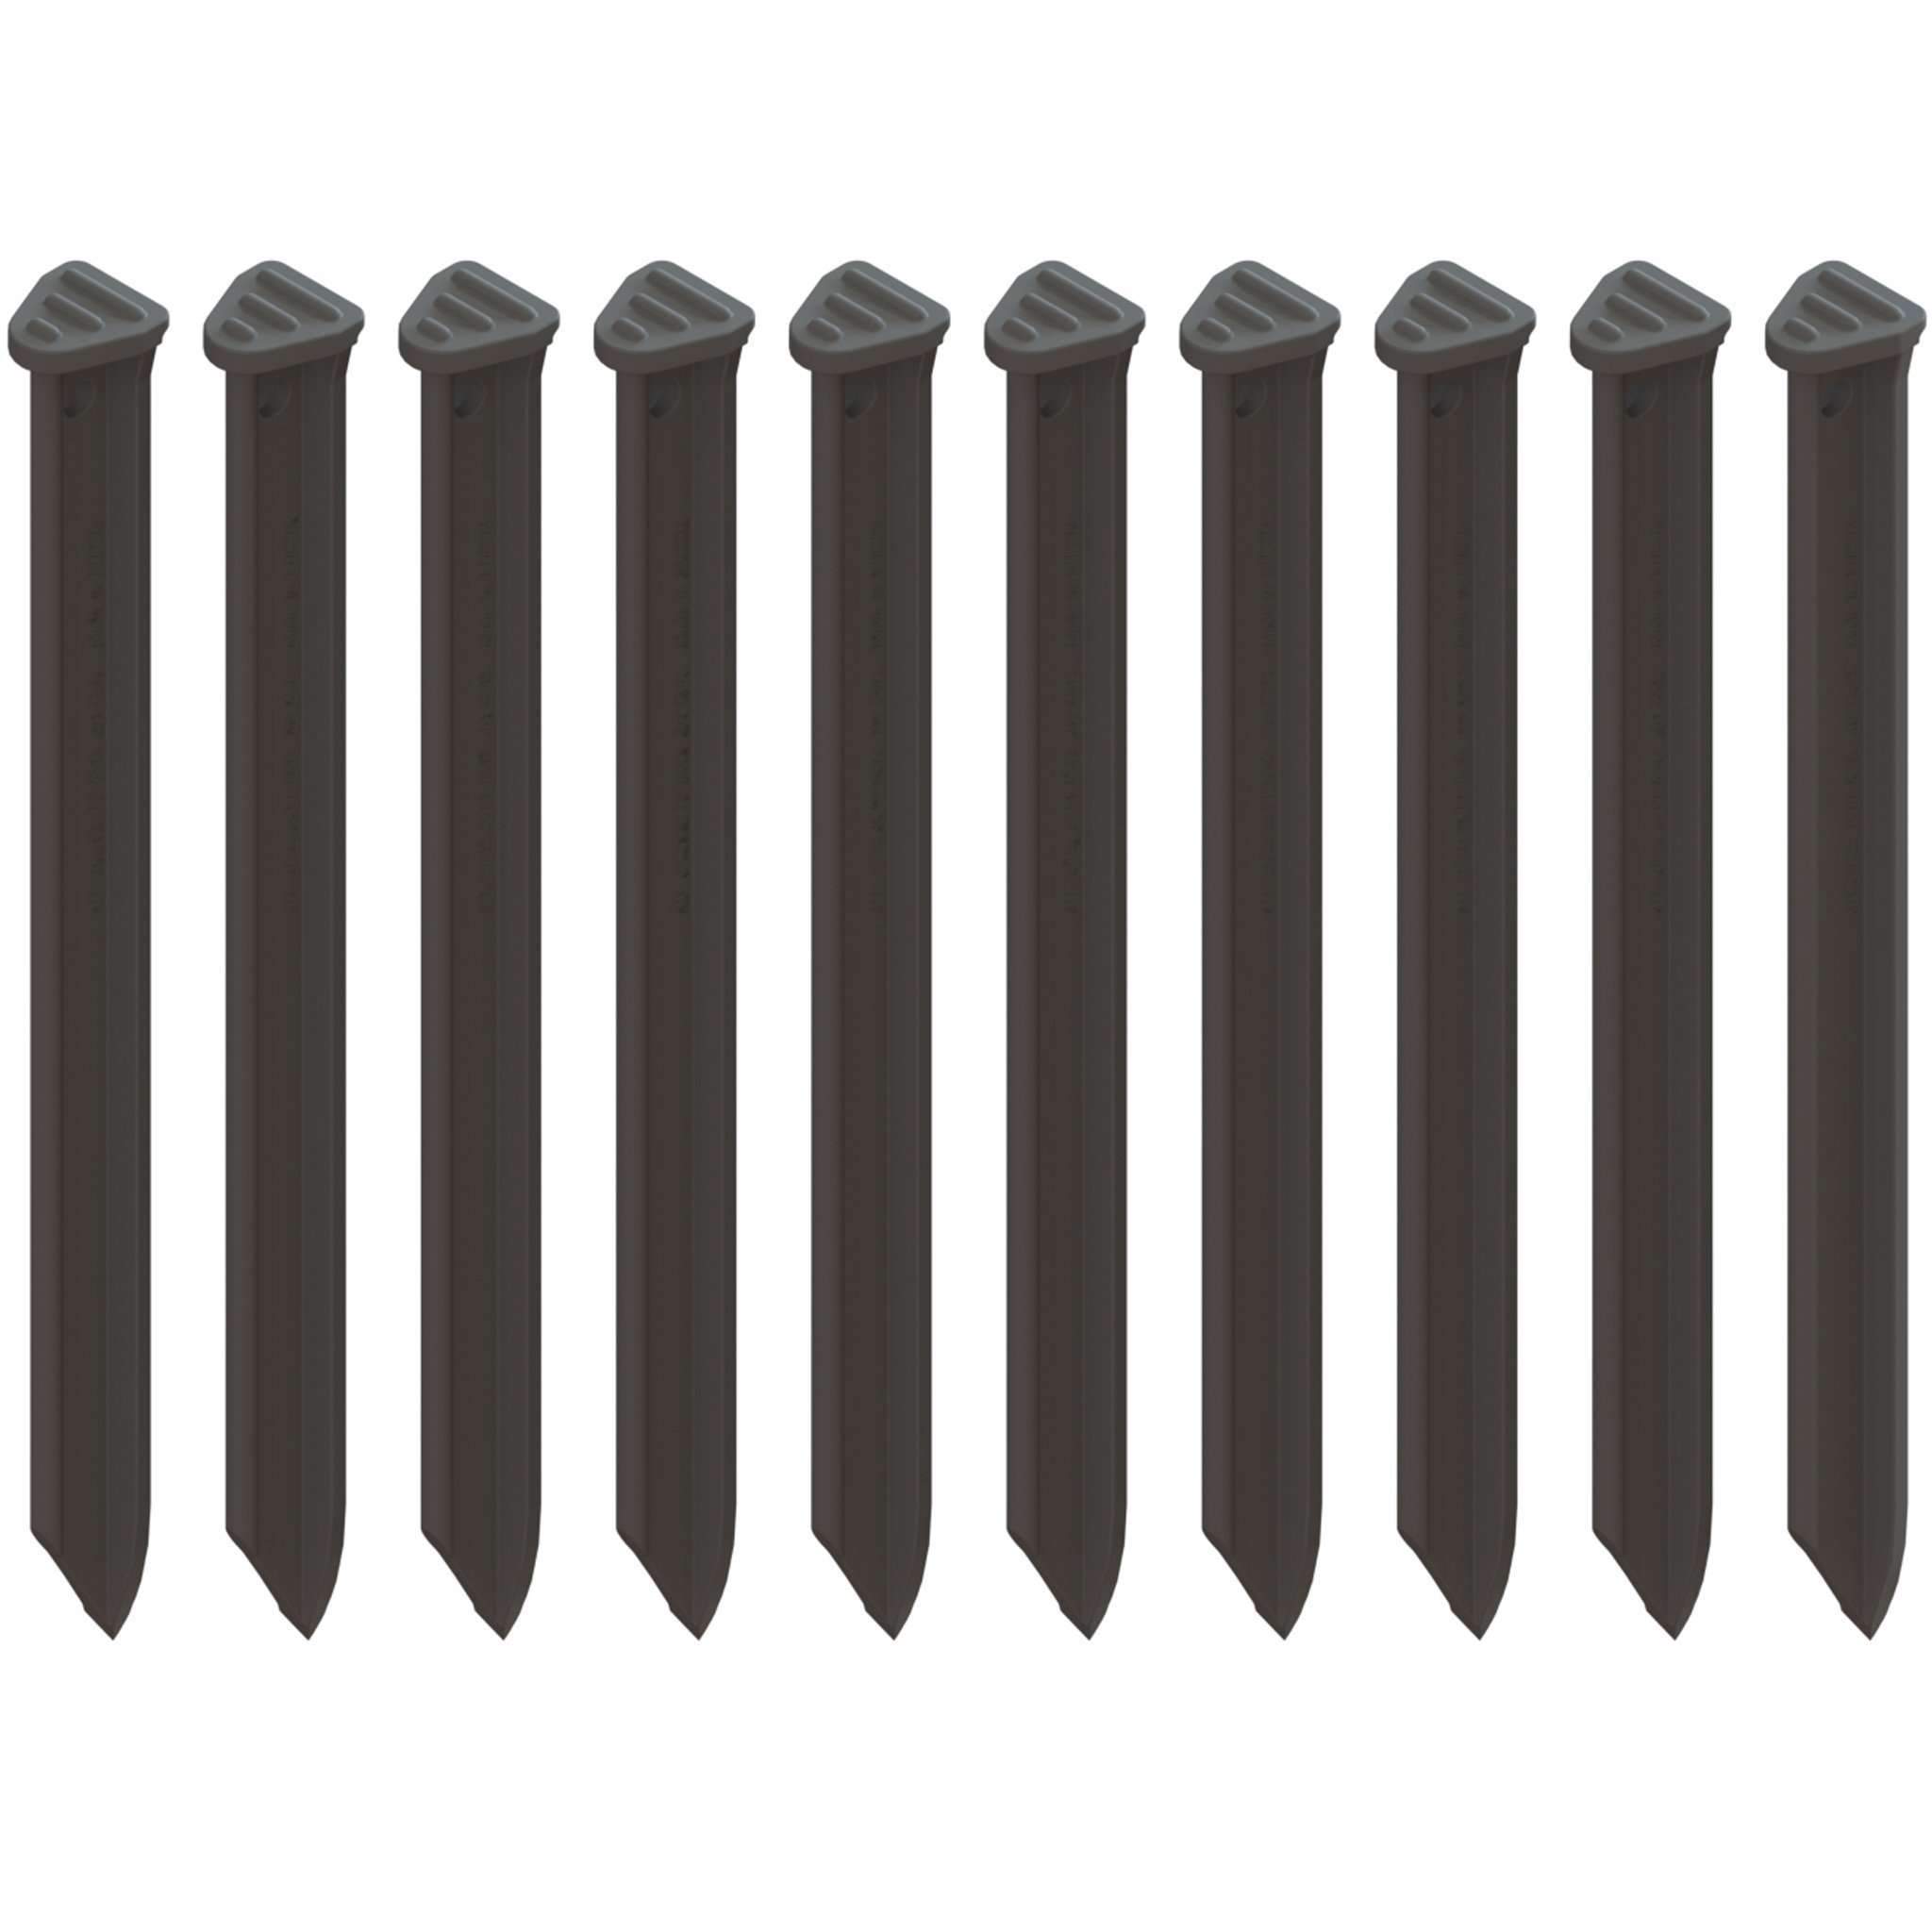 EasyPave / HEXpave Anchors - 10 Pack